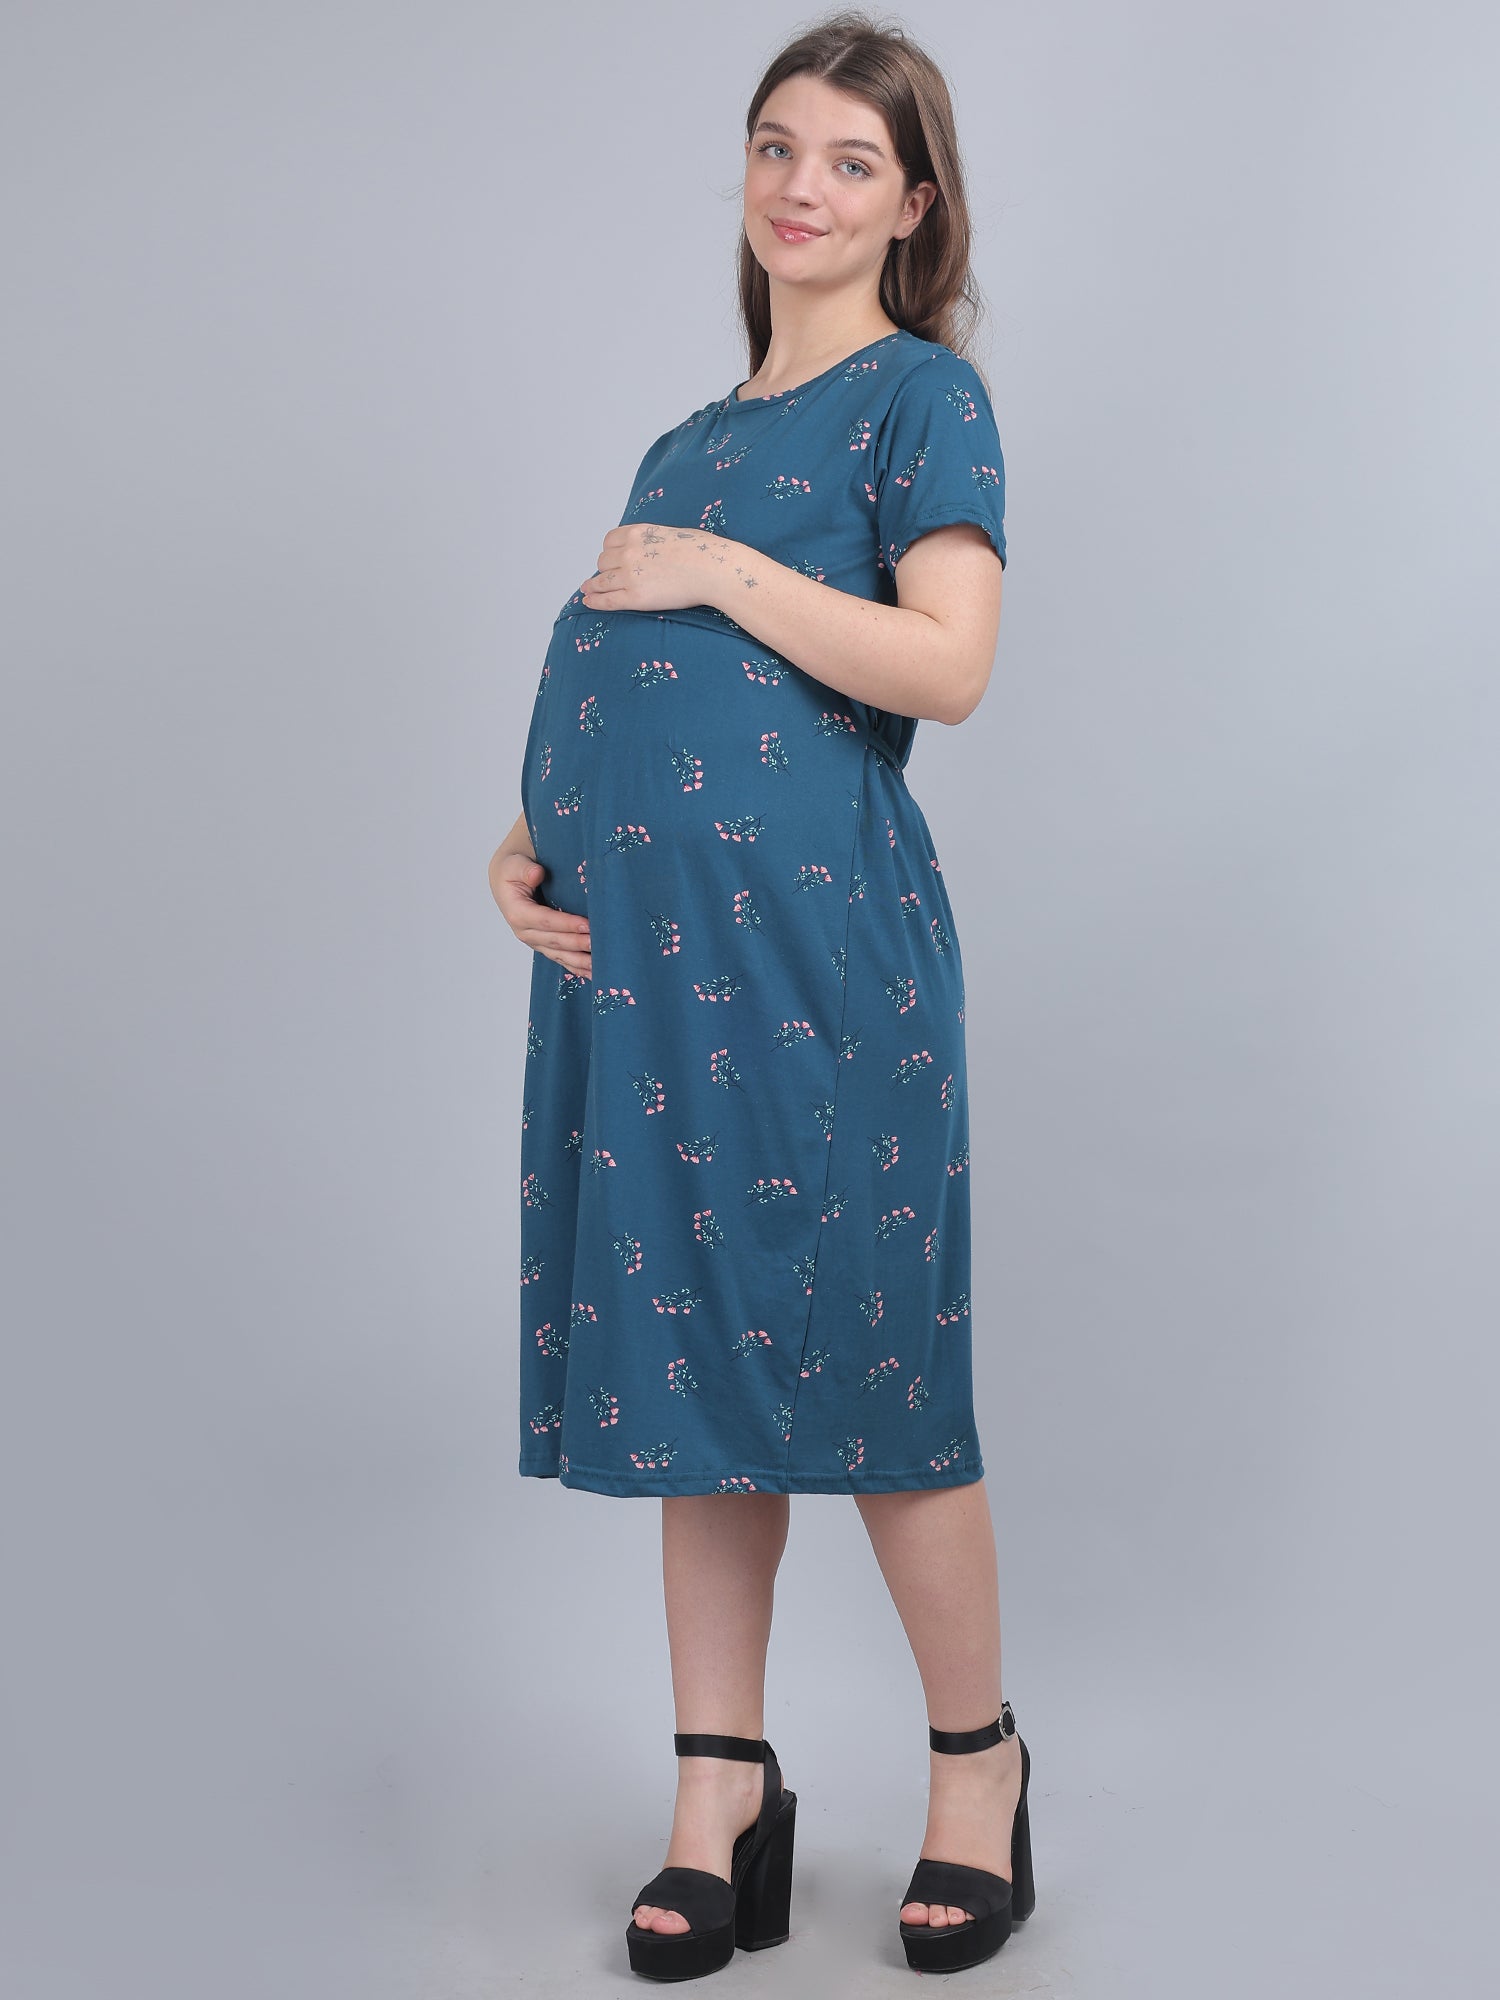 Teal Blue Knitted Cotton Maternity Loungewear Dress